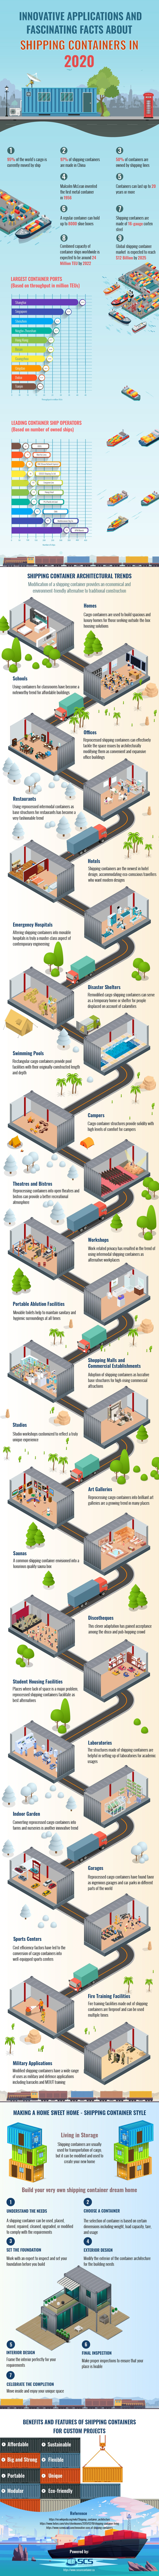 Shipping Container Trends & Facts Infographic-2020